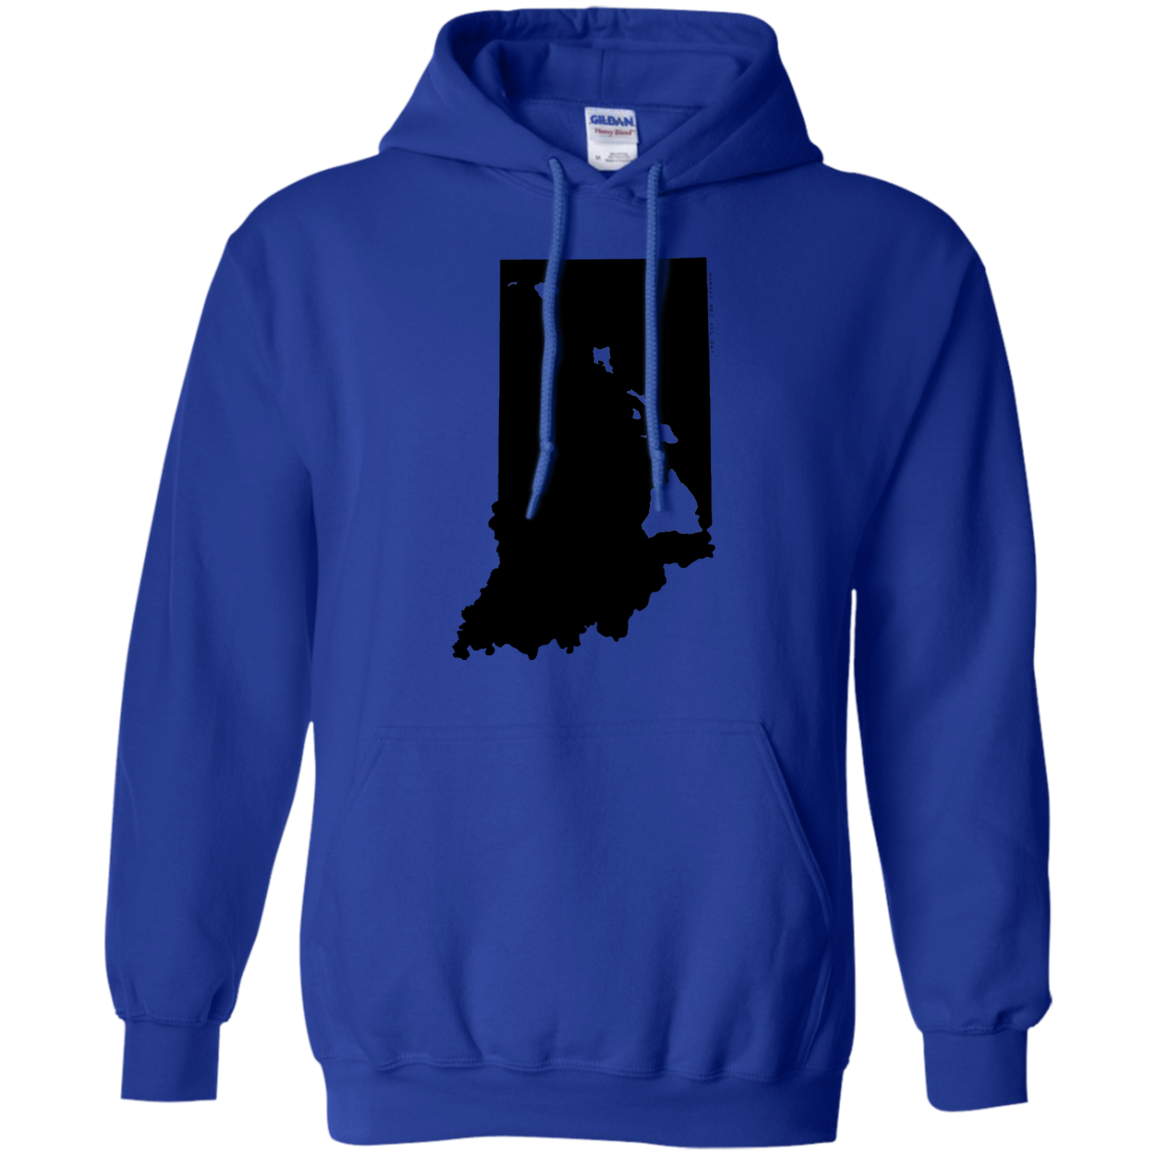 Living in Indiana with Hawaii Roots Pullover Hoodie 8 oz., Sweatshirts, Hawaii Nei All Day